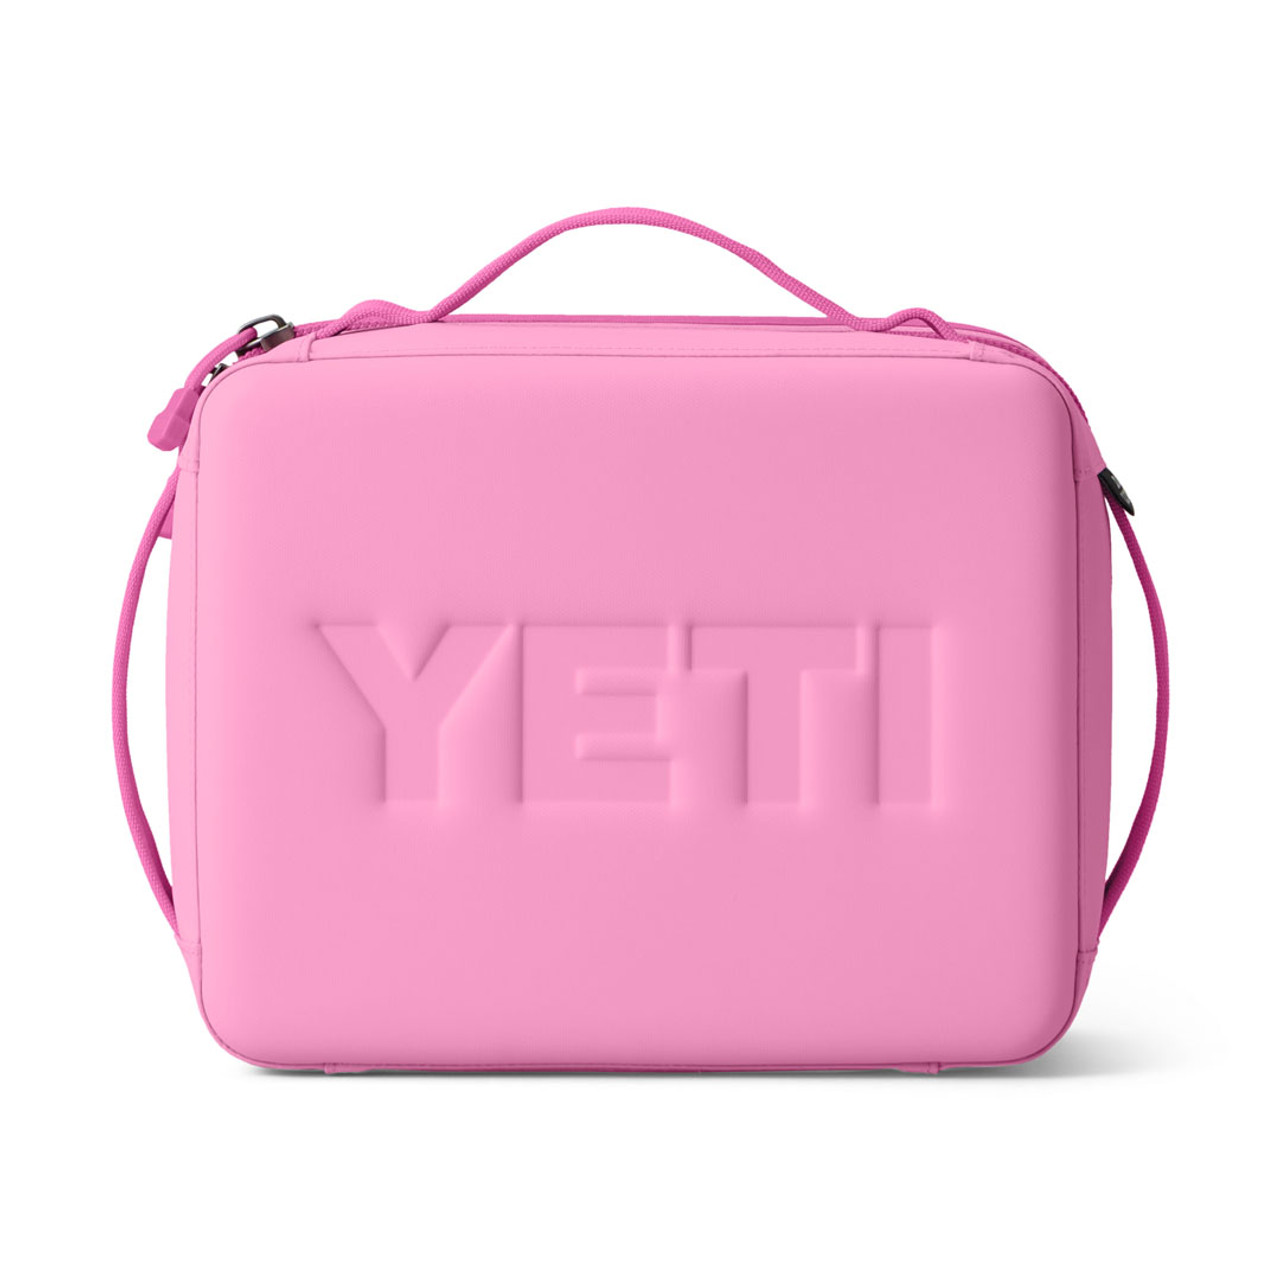 https://cdn11.bigcommerce.com/s-ppsyskcavg/images/stencil/1280x1280/products/68662/248072/YETI_Wholesale_site_studio_Bags_Daytrip_Lunch_Box_Pink_Back_1397_B_2400x2400__46282.1694632543.jpg?c=2?imbypass=on